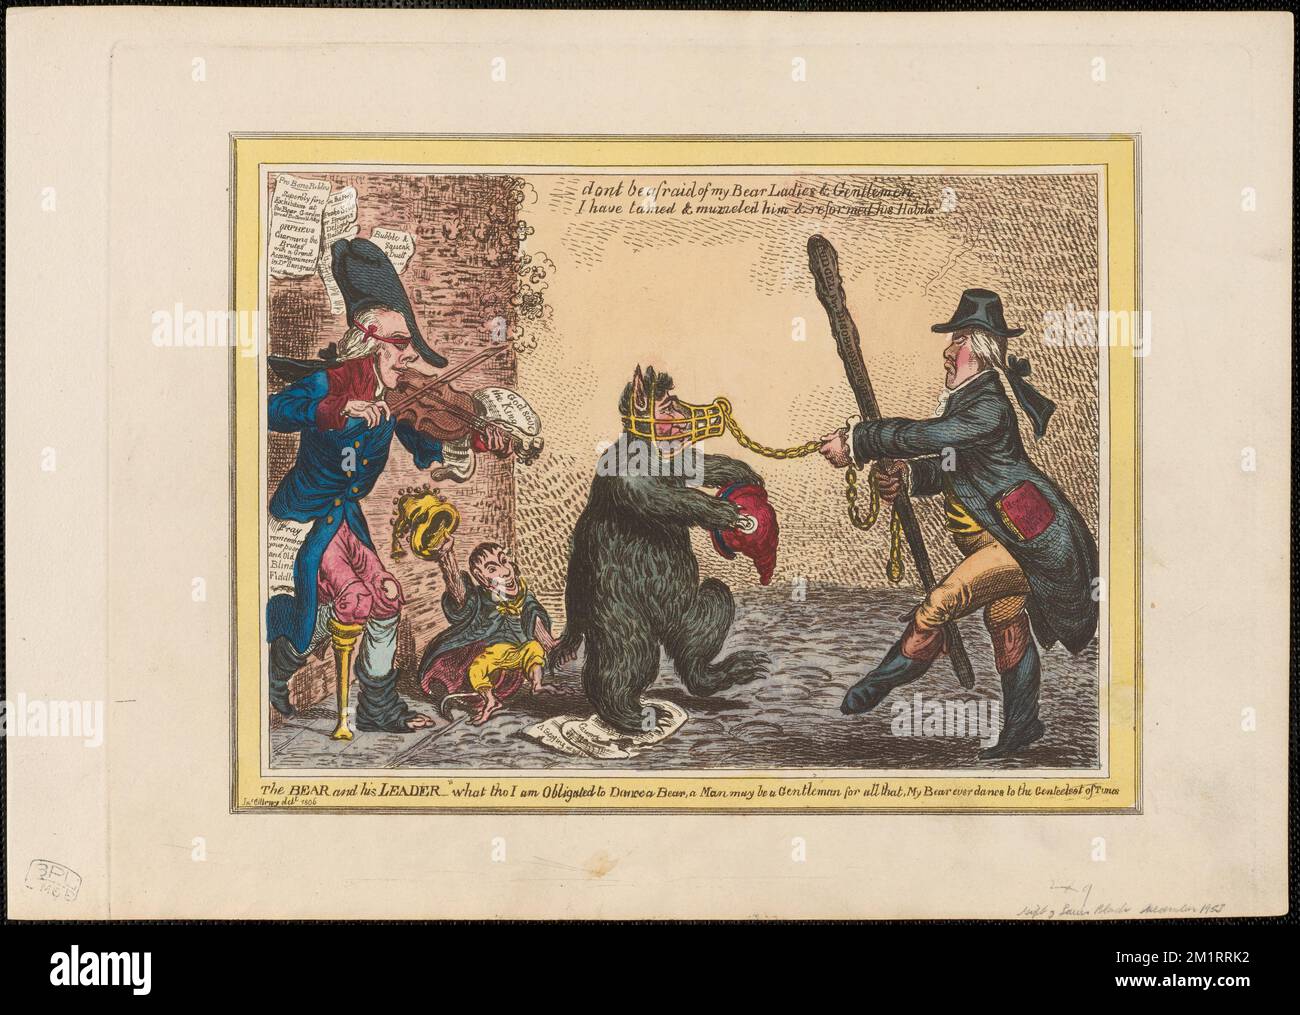 The bear and his leader , Kings, Politicians, Nobility, Government officials, Bears, Monkeys, Animal shows, Dance, Fox, Charles James, 1749-1806, George III, King of Great Britain, 1738-1820, Sidmouth, Henry Addington, Viscount, 1757-1844, Lansdowne, Henry Petty-Fitzmaurice, Marquess of, 1780-1863, Grenville, William Wyndham Grenville, Baron, 1759-1834. James Gillray (1756-1815). Prints and Drawings Stock Photo